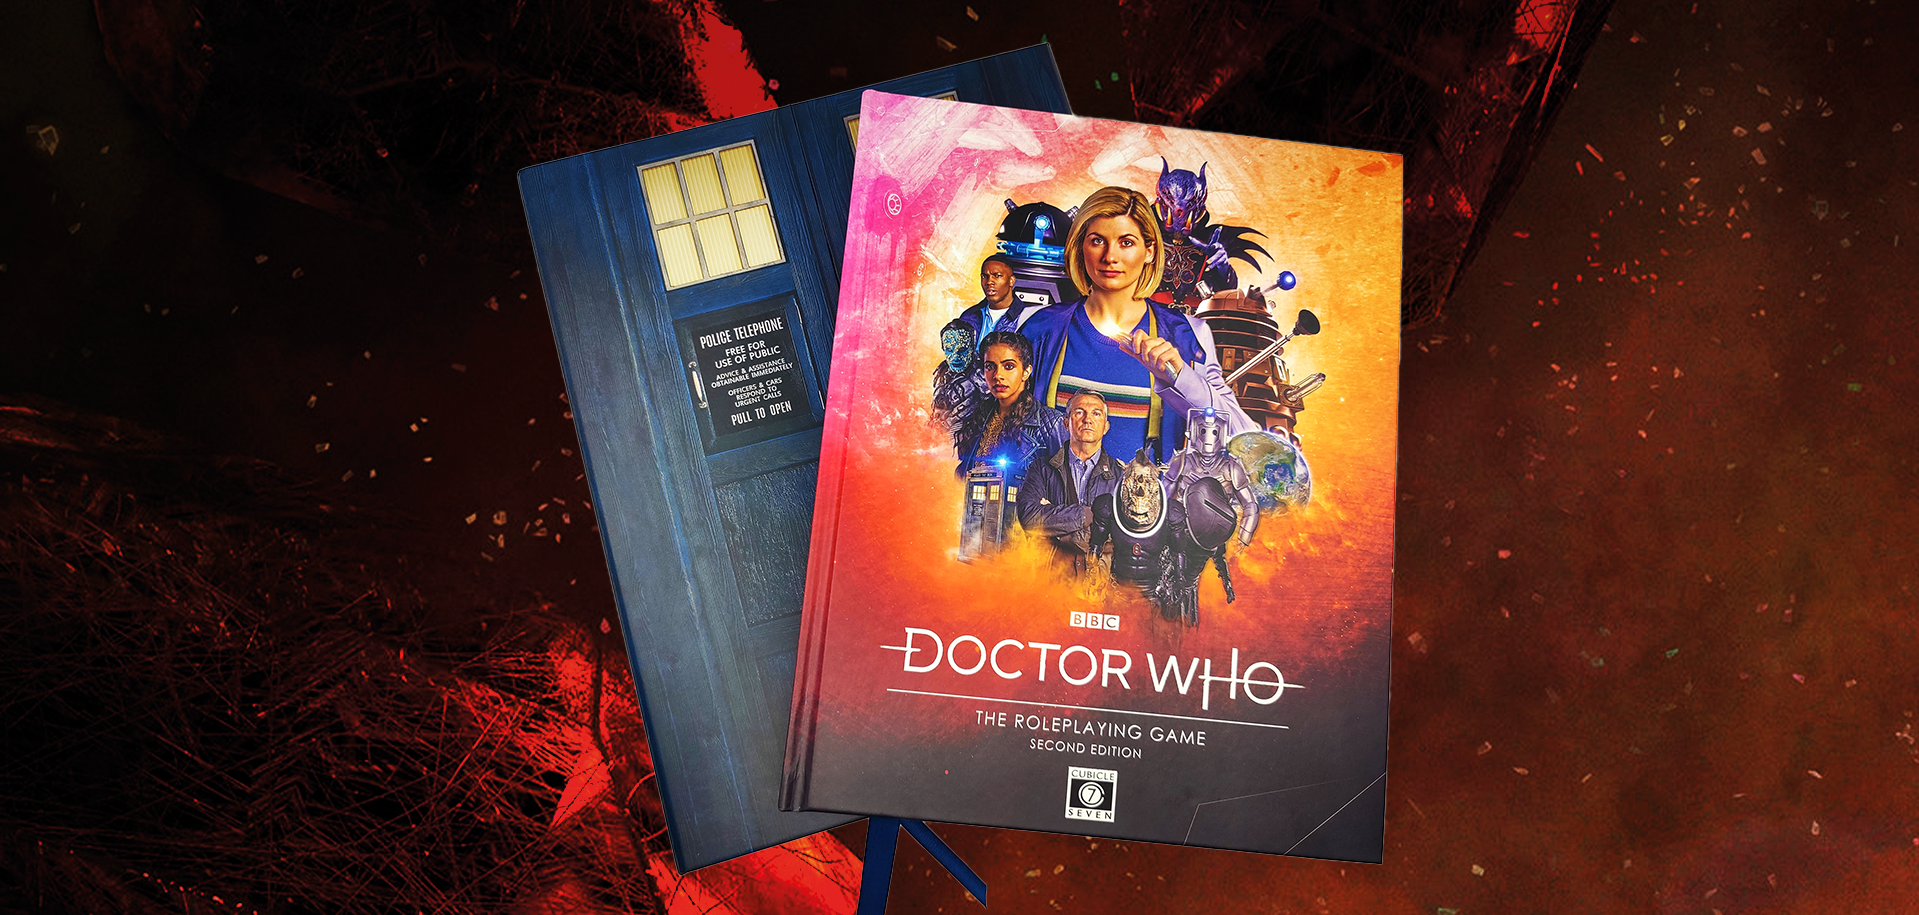 Doctor Who Roleplaying game book front cover displayed ontop of the Doctor Who Roleplaying game Collectors Edition book's front cover